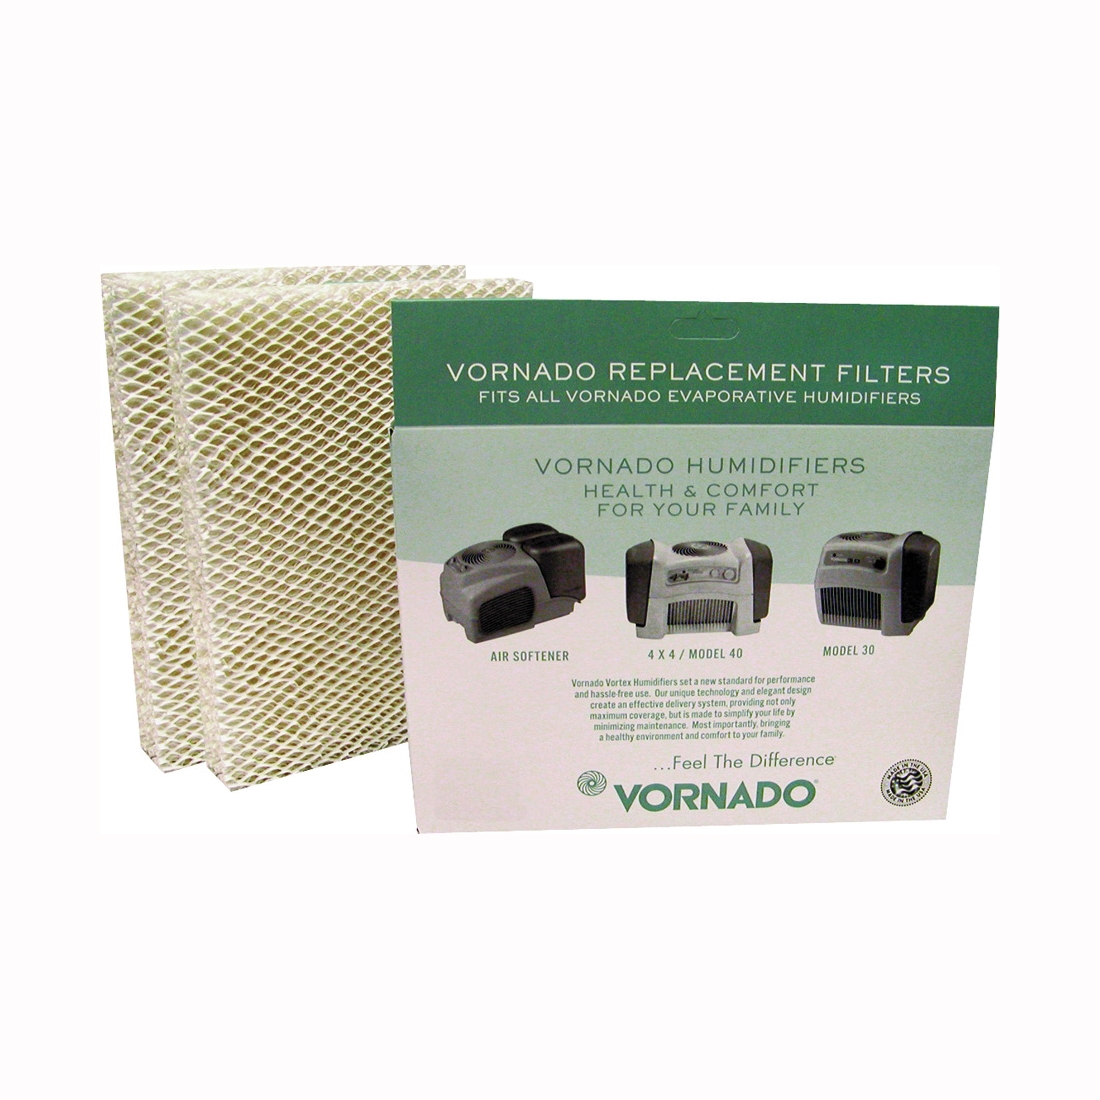 RPS Products Inc H100-6 Humidifier Filter